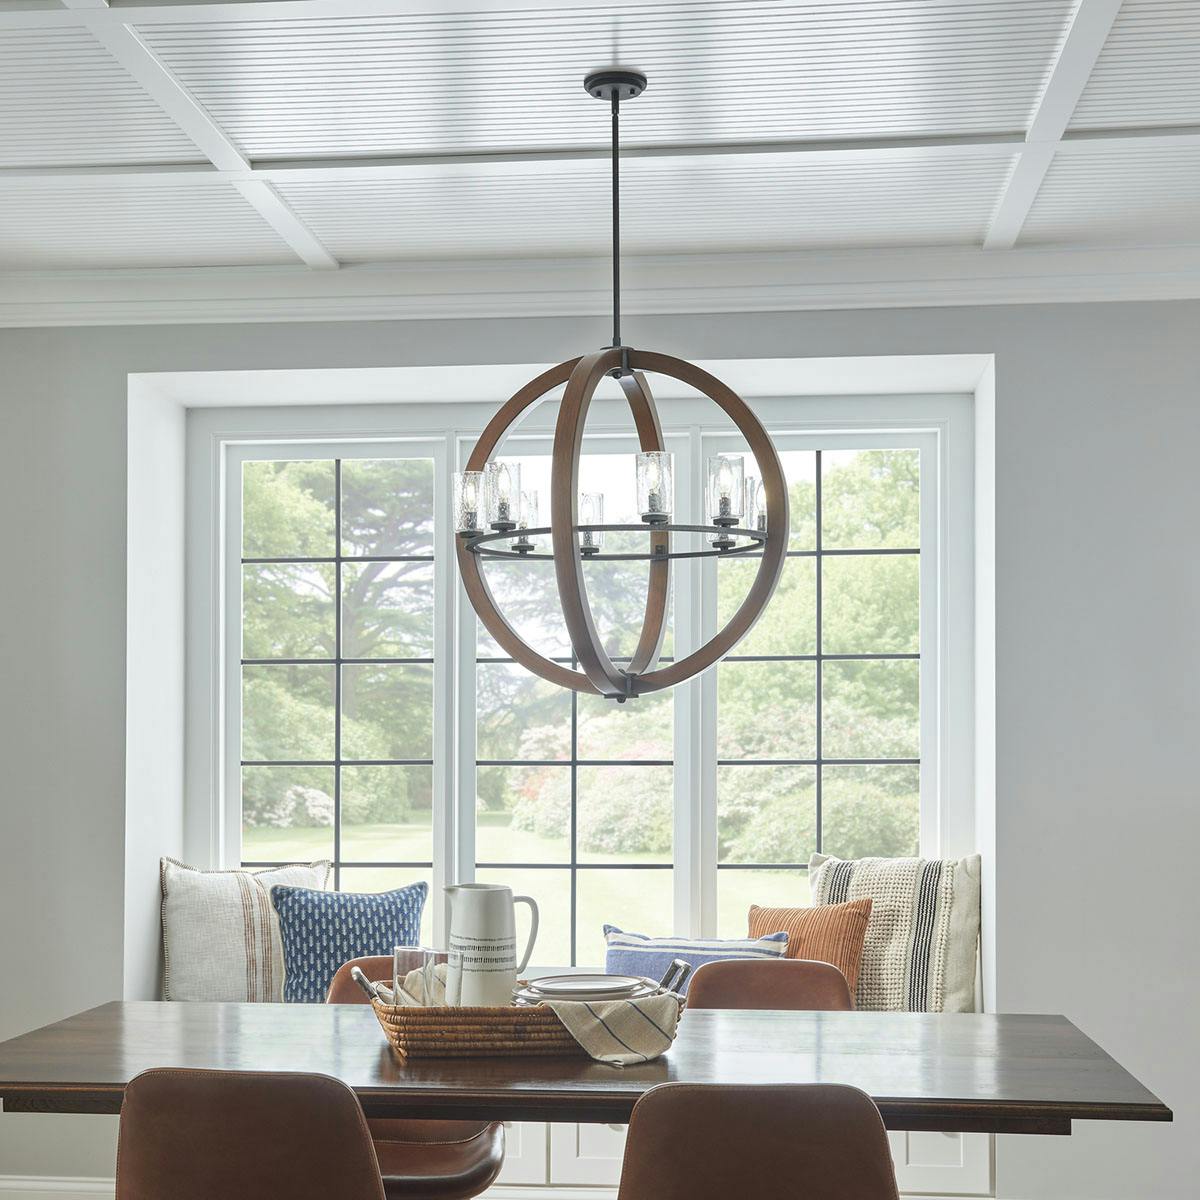 Day time dining room image featuring GrandBank chandelier 43190AUB